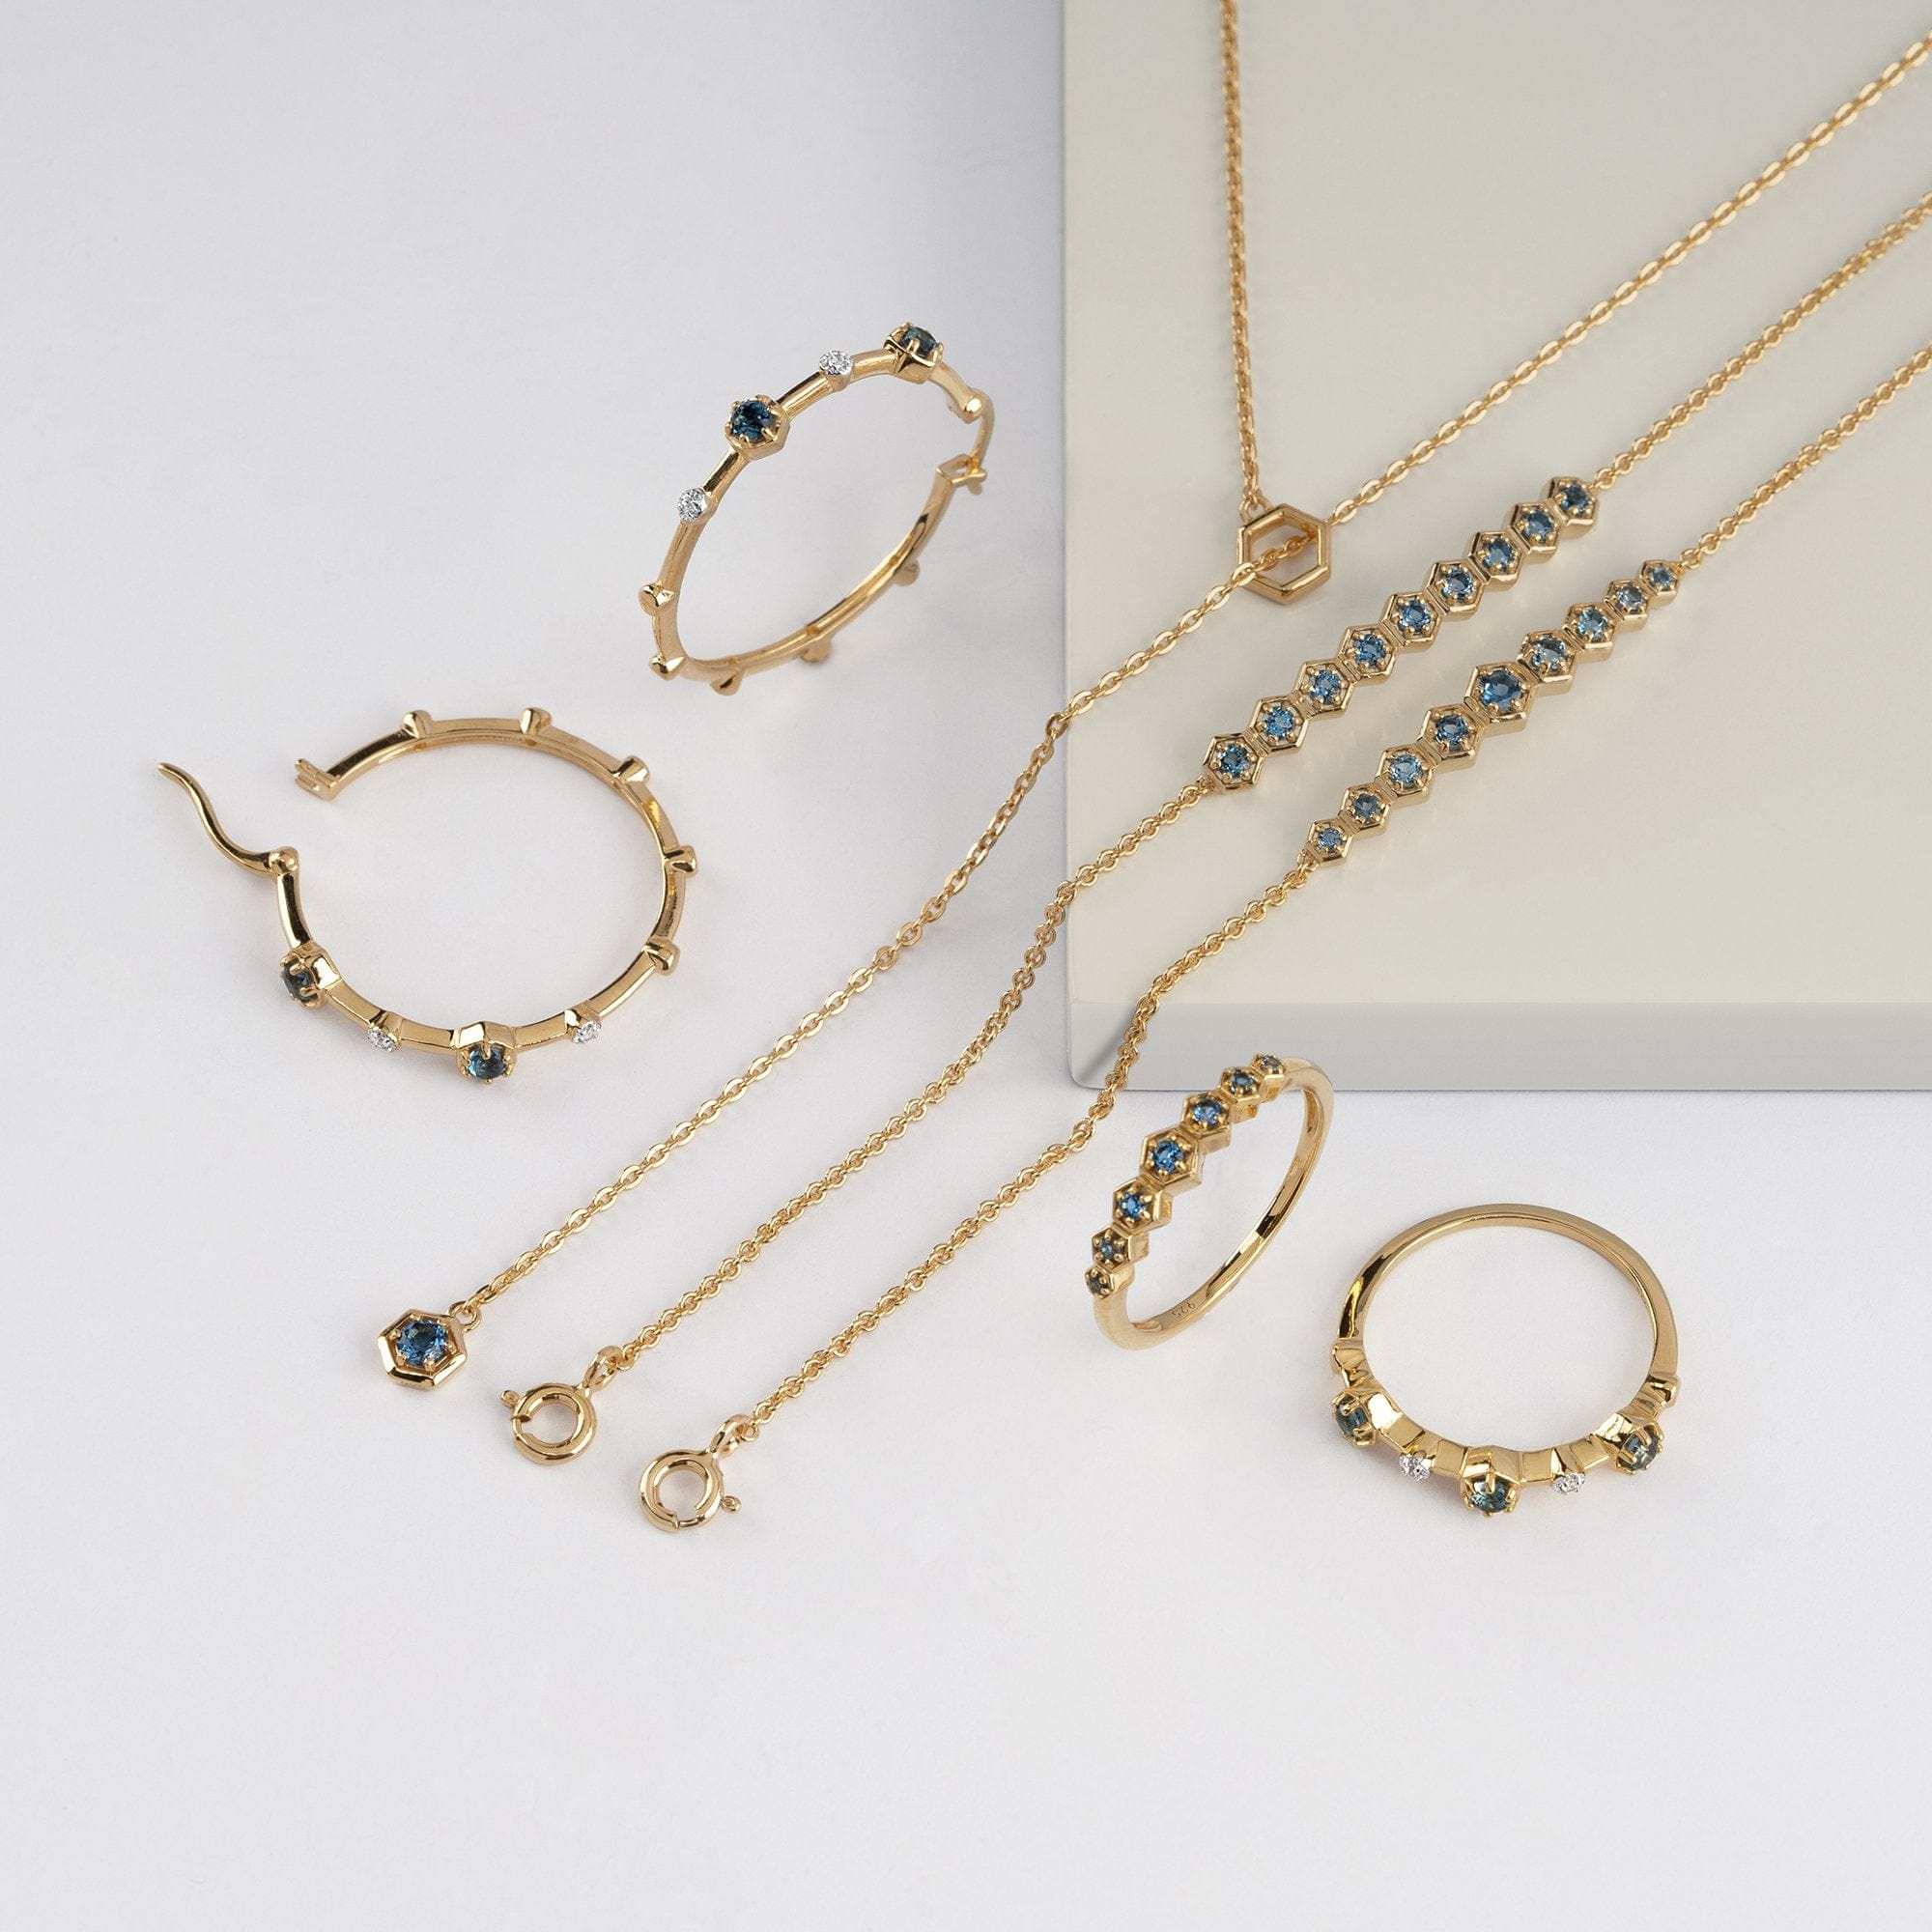 The Modern Glam Topaz Jewellery Collection